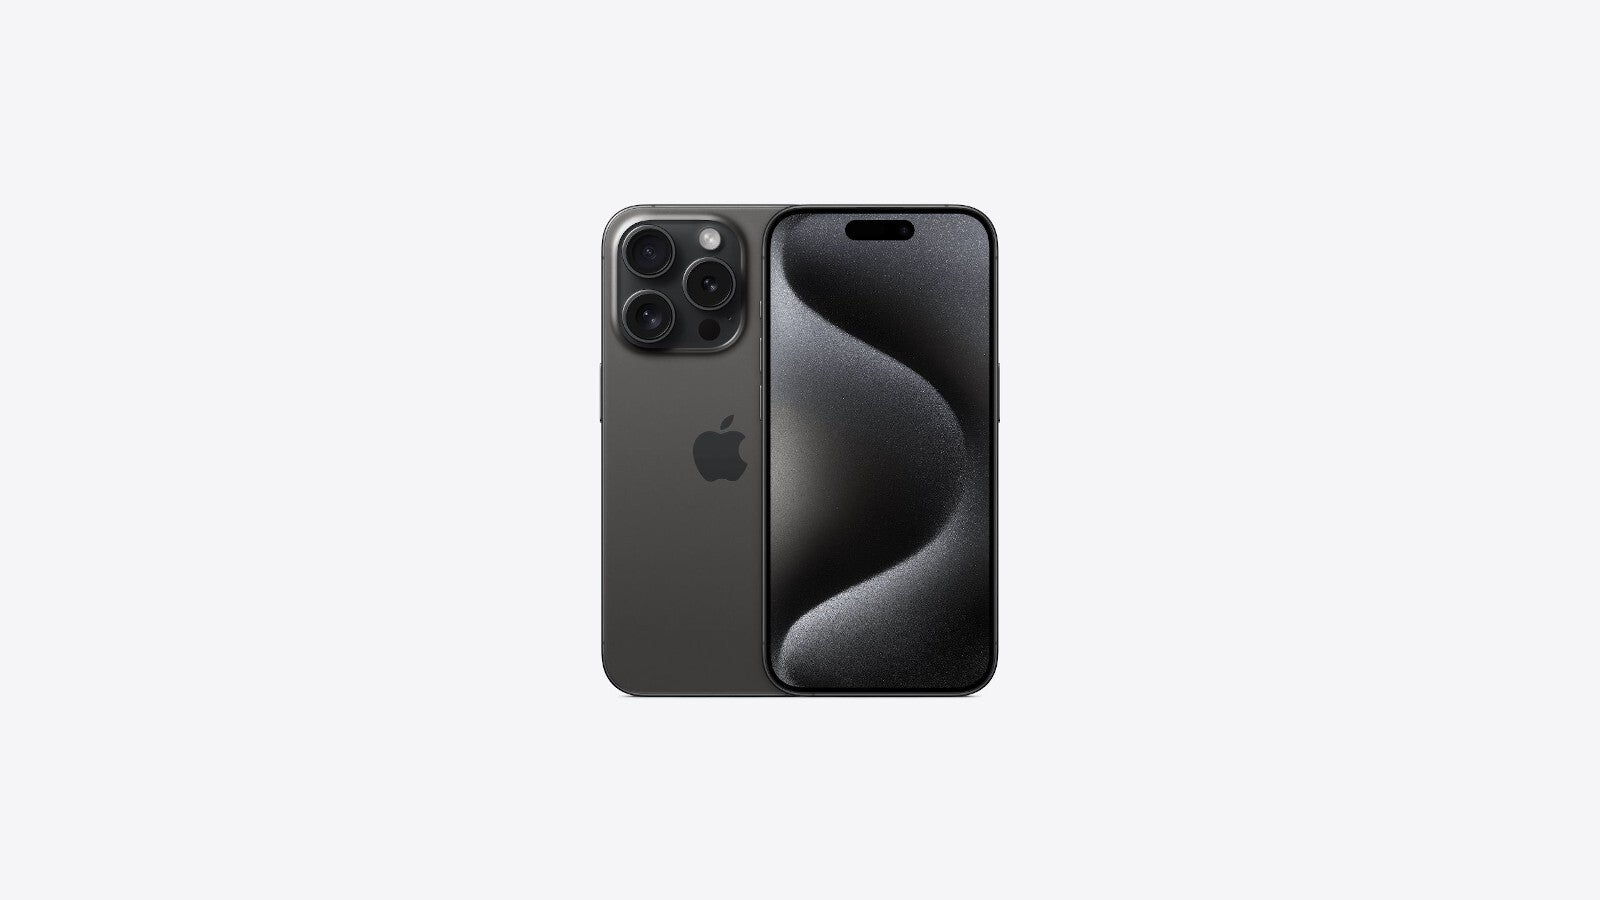 The iPhone 15 Pro in Black Titanium (Image Credit - Apple) - iPhone 15 colors: finding yours across 15, Pro, and Pro Max